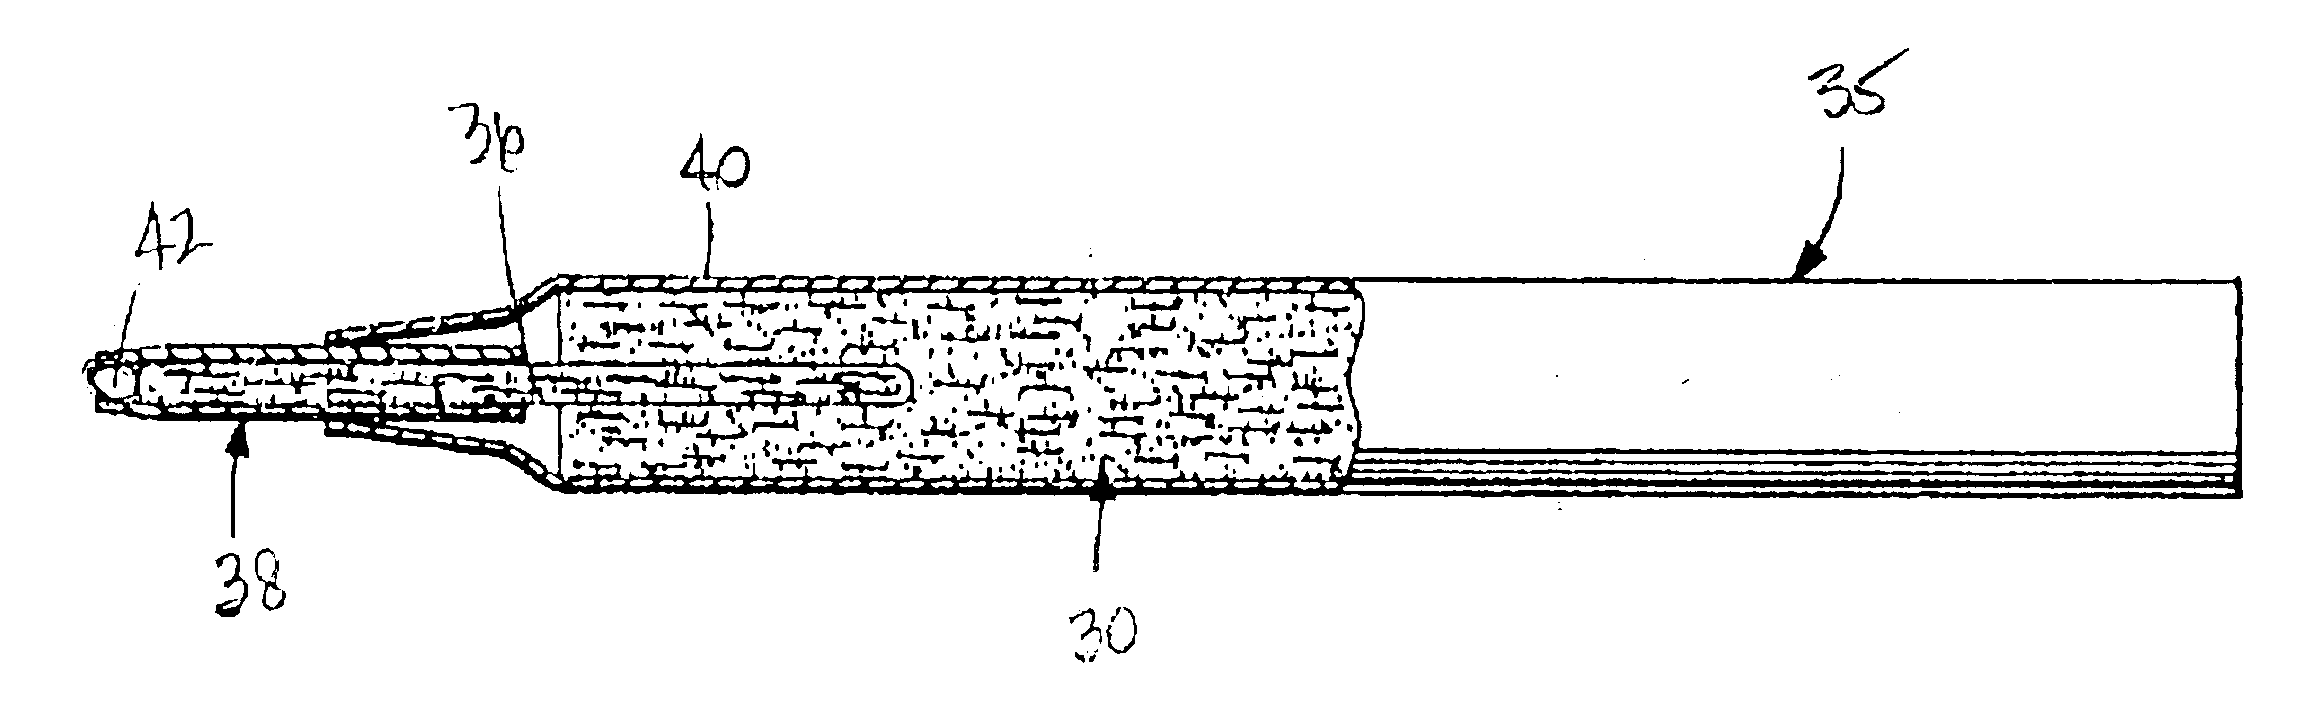 Method and apparatus for making NIBS and ink reservoirs for writing and marking instruments and the resultant products